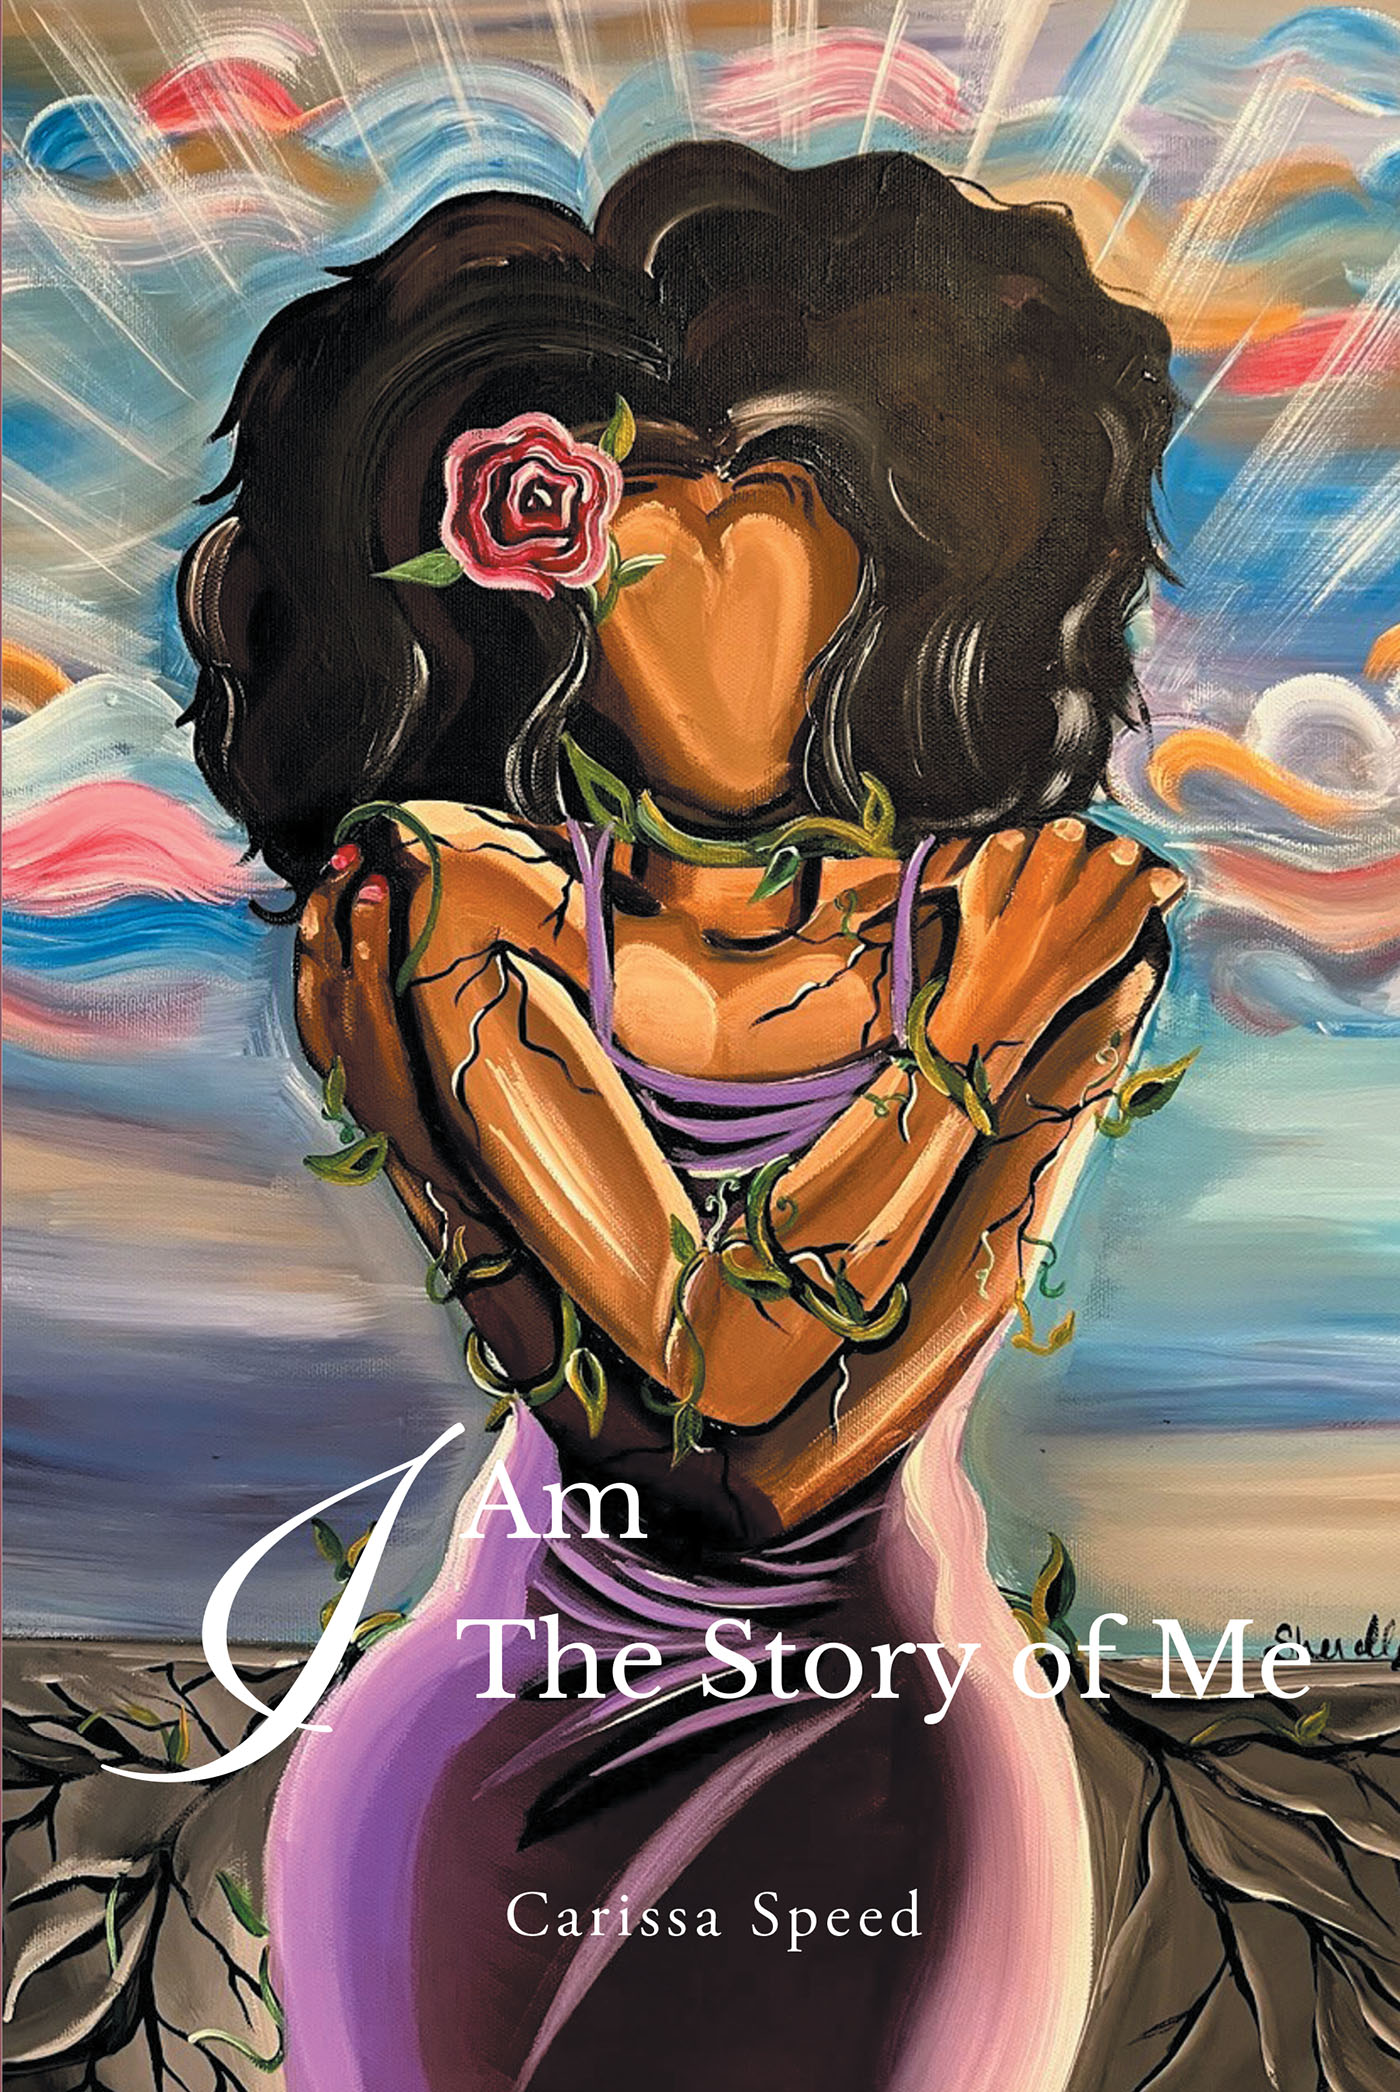 Author Carissa Speed’s New Book, "I Am: The Story of Me," is an Autobiographical Account of the Trials and Triumphs of the Author as She Took Back Control of Her Life